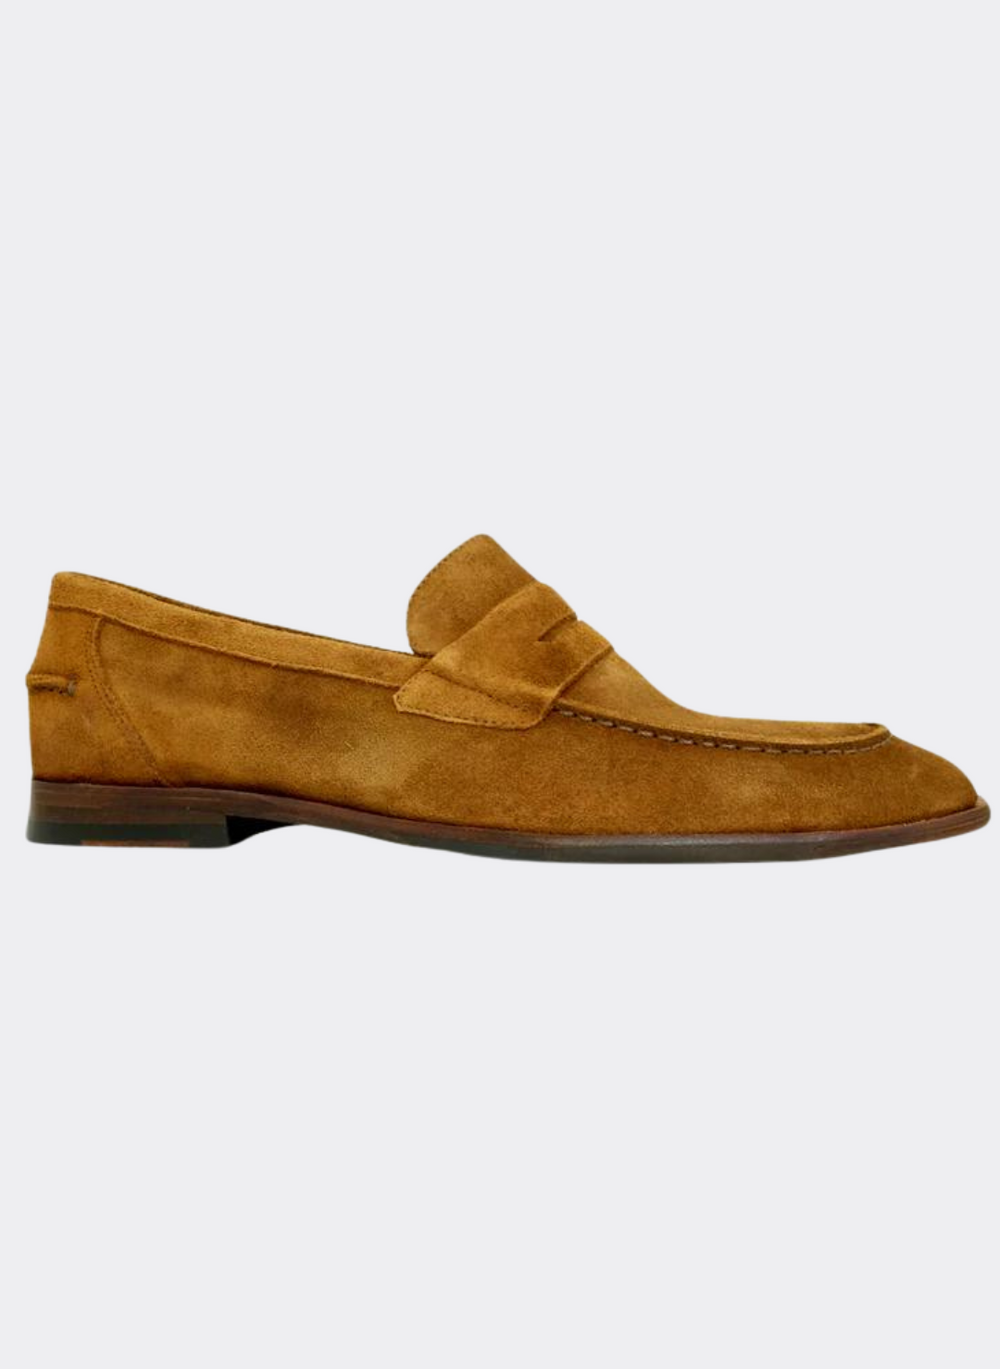 The Oxford Shop Naples Penny Loafer In Bourbon Suede